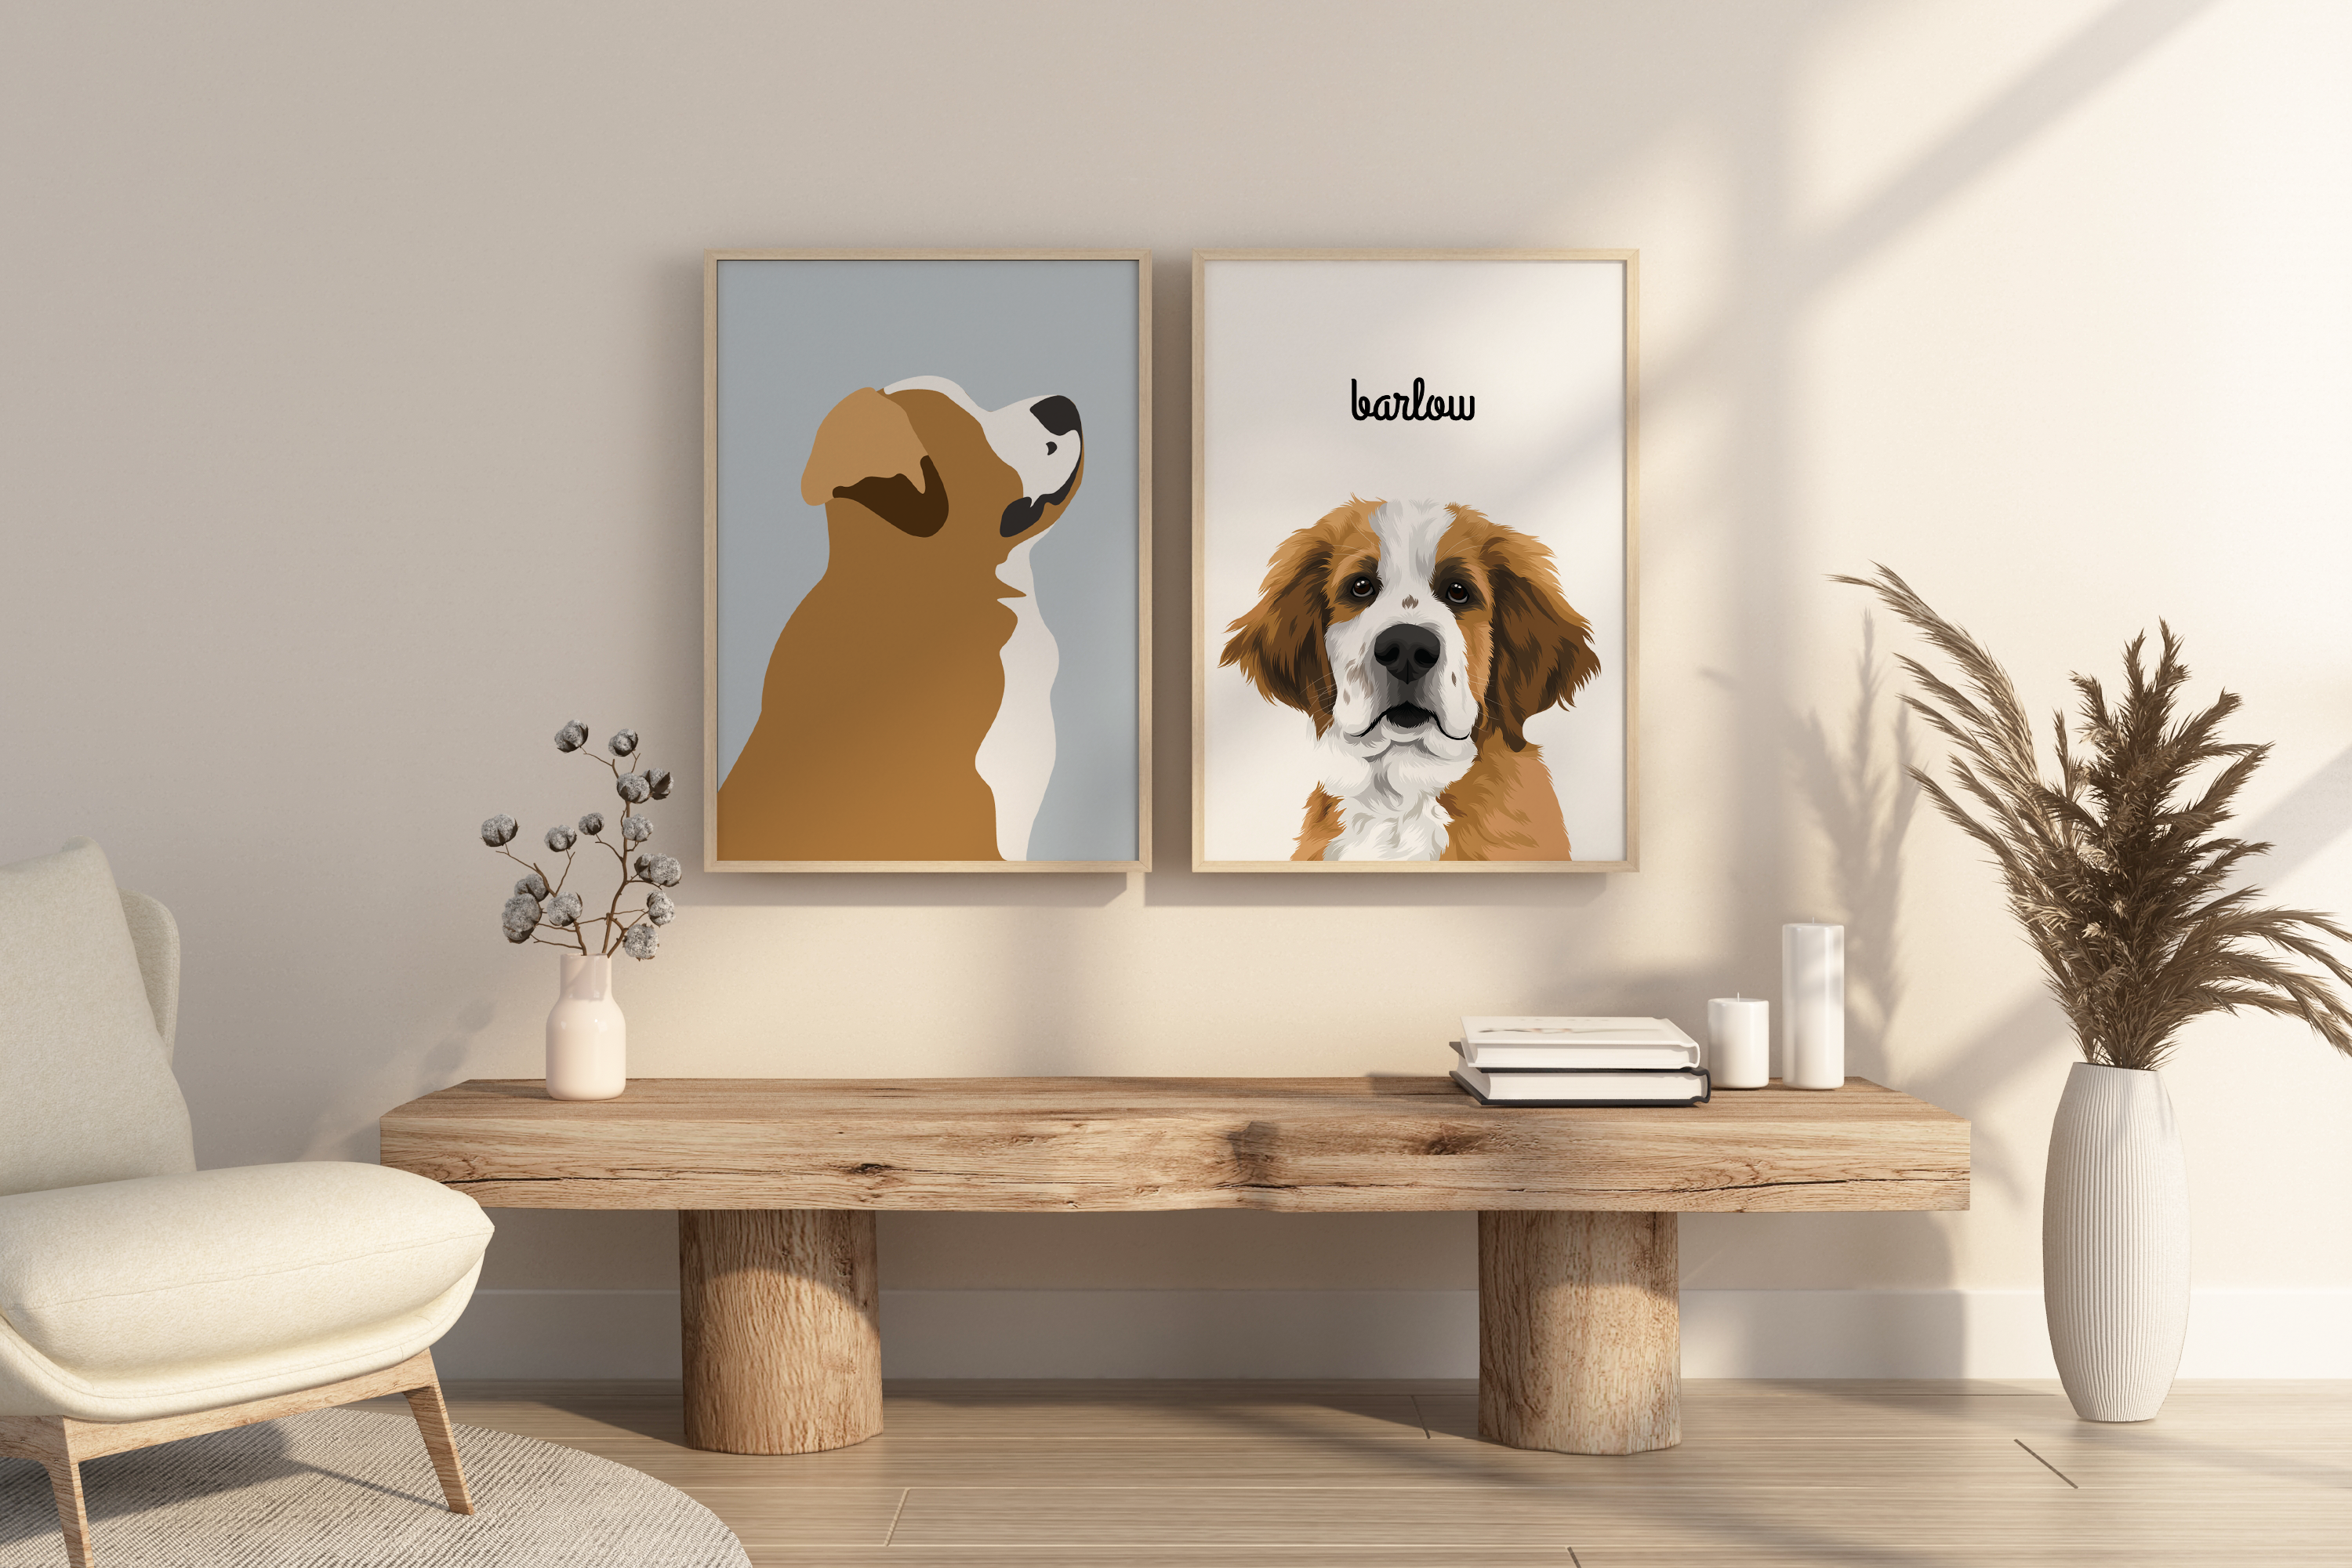 custom bernese mountain dog pet portrait in both a minimal and illustrated style, on 18x24 sized frame in natural wood finish